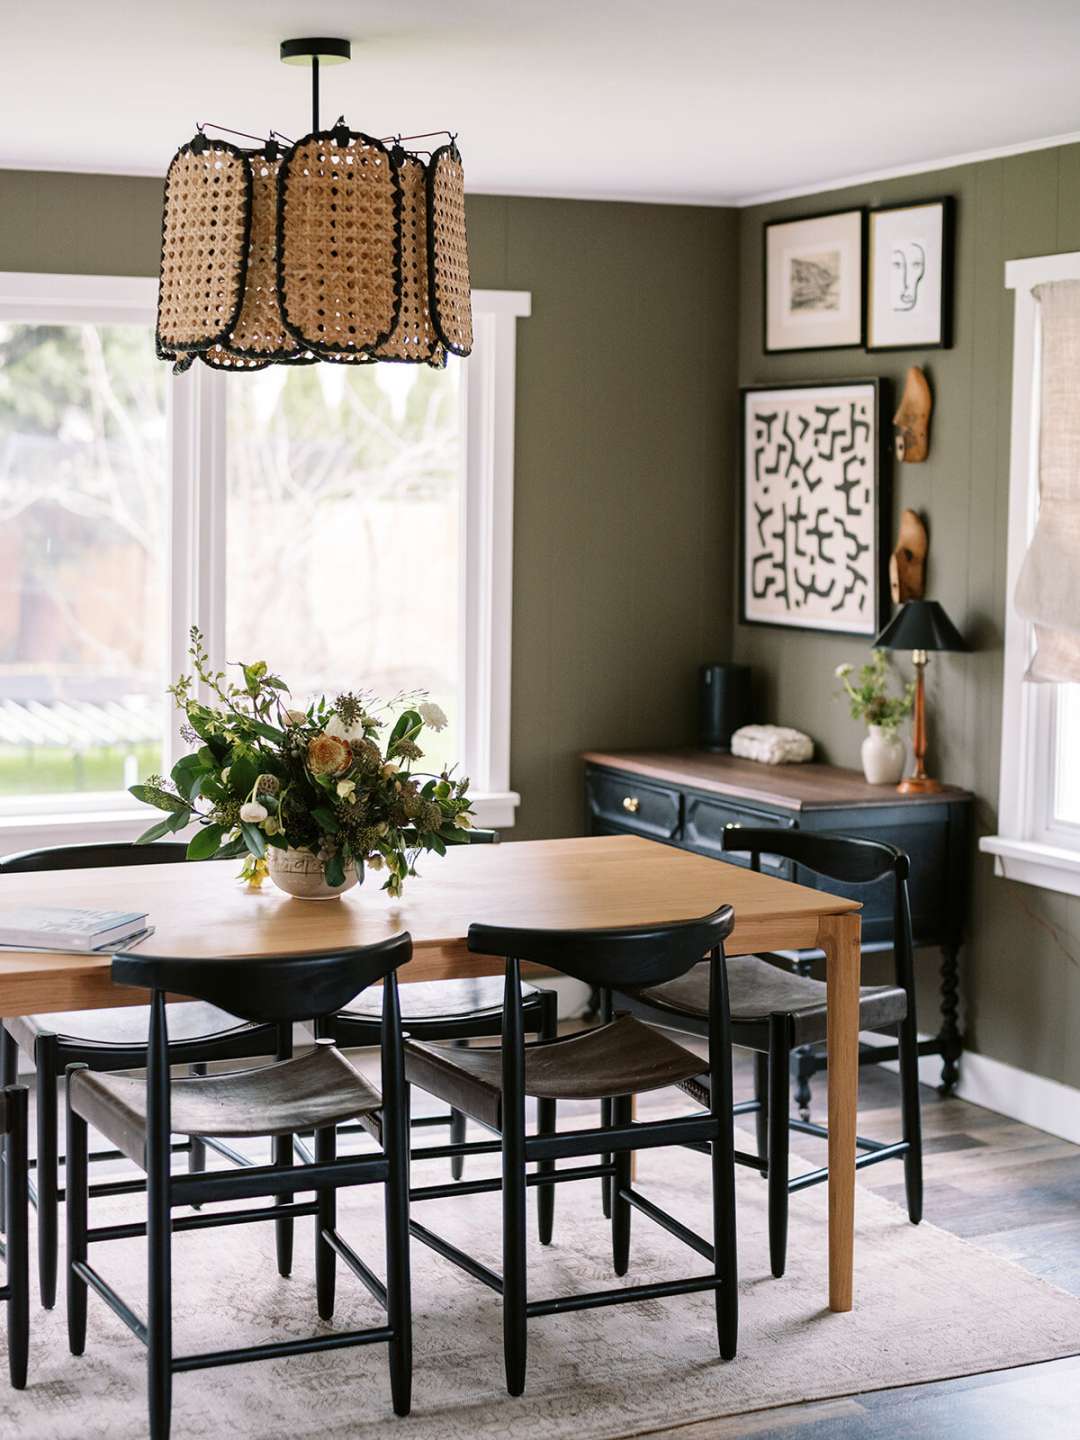 OUR GREEN-ISH DINING ROOM PAINT COLOR + WHY I LOVE IT